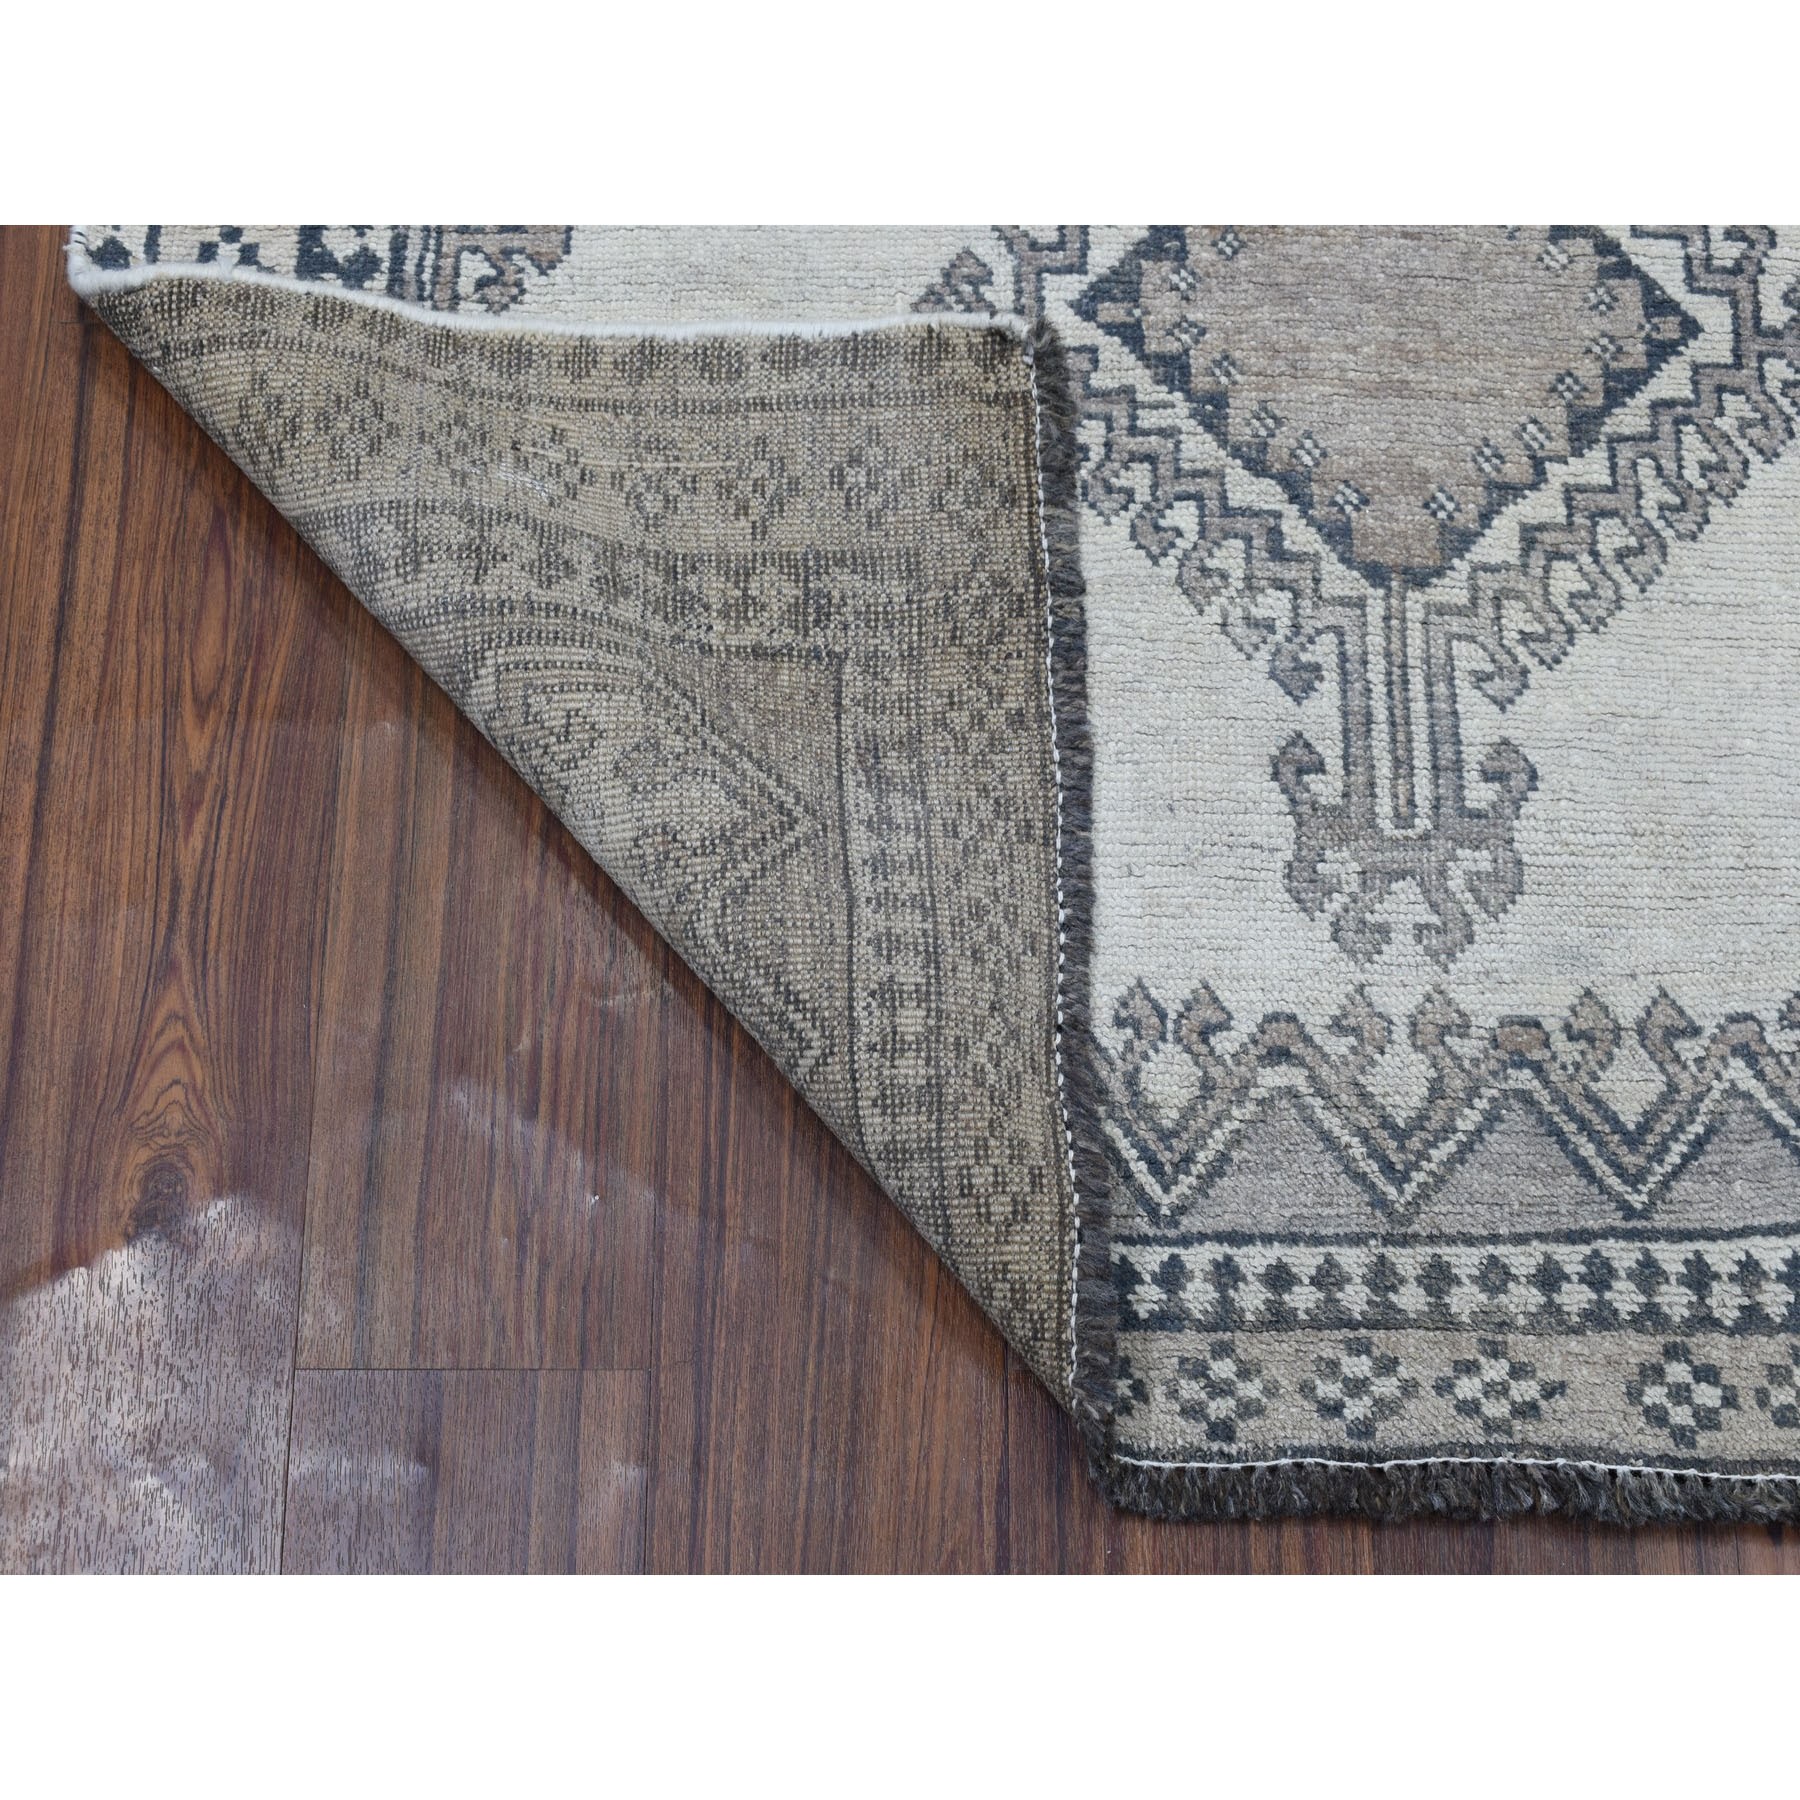 4-1 x6-7   Vintage And Worn Down Distressed Colors Persian Qashqai Hand Knotted Bohemian Rug 